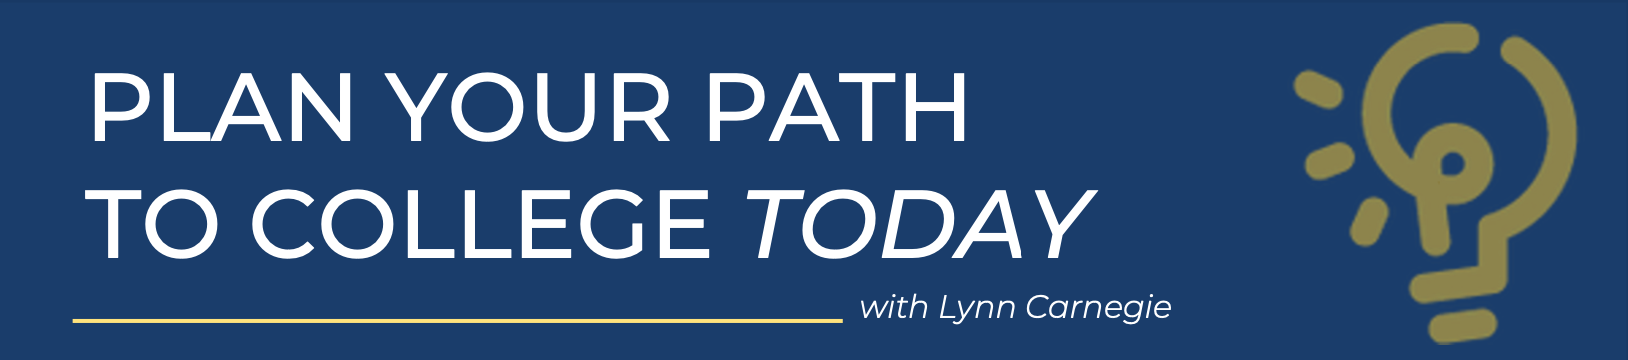 Plan Your Path To College Today